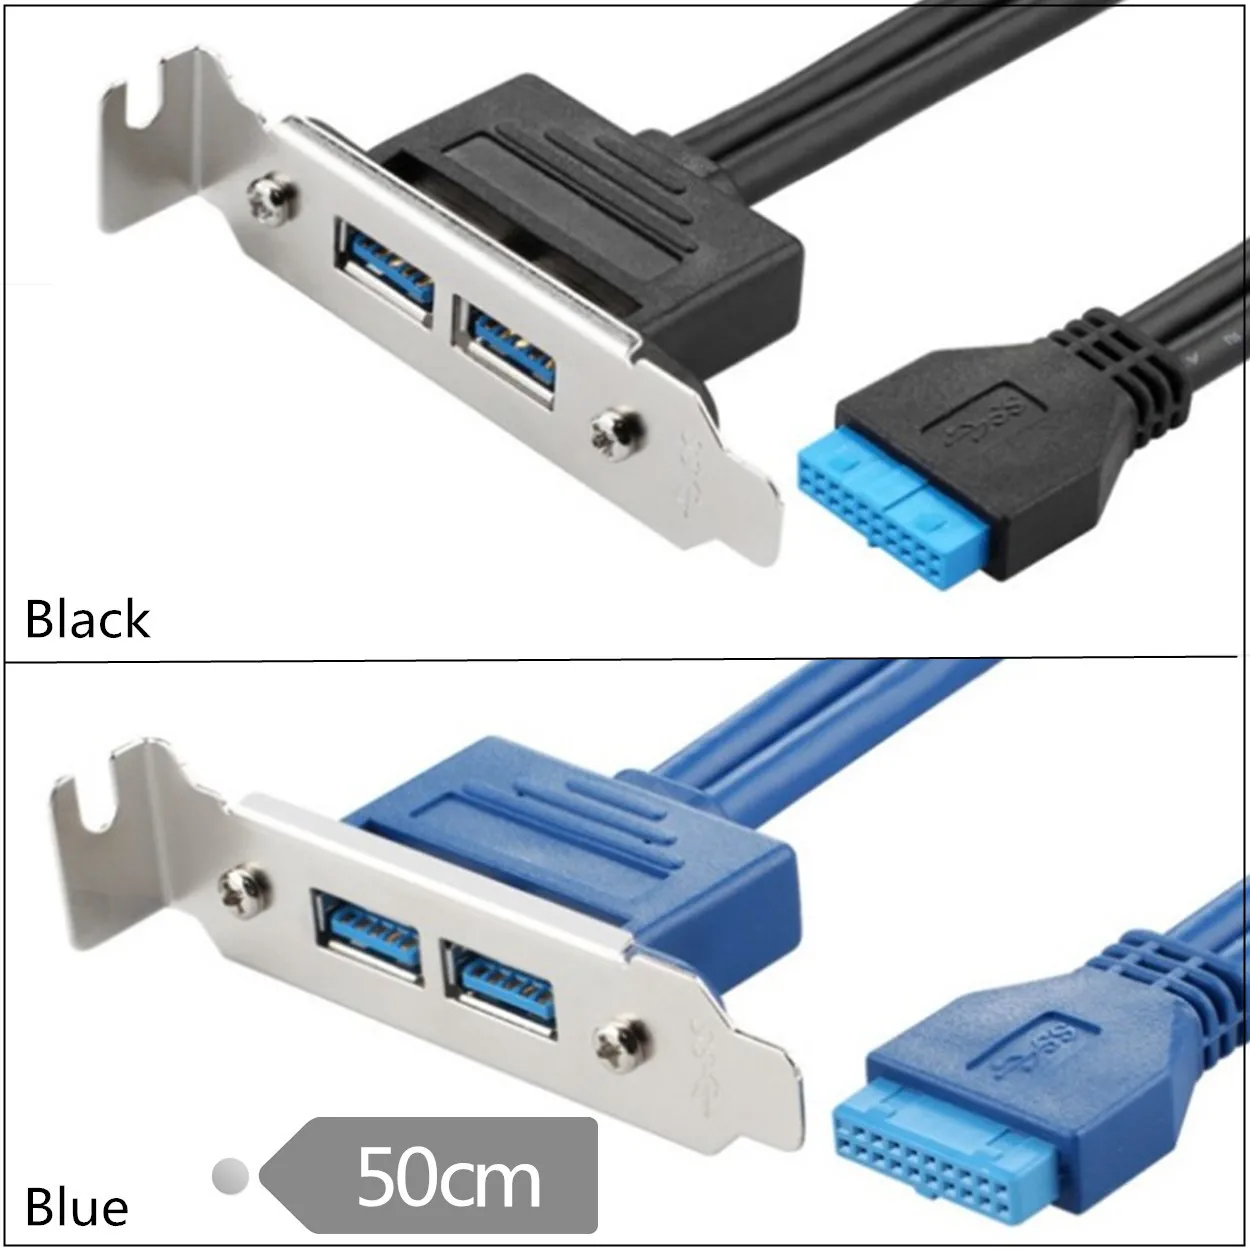 

USB 3.0 Dual Female Plug and Play Mount to Motherboard 20pin Header Cable 0.5m